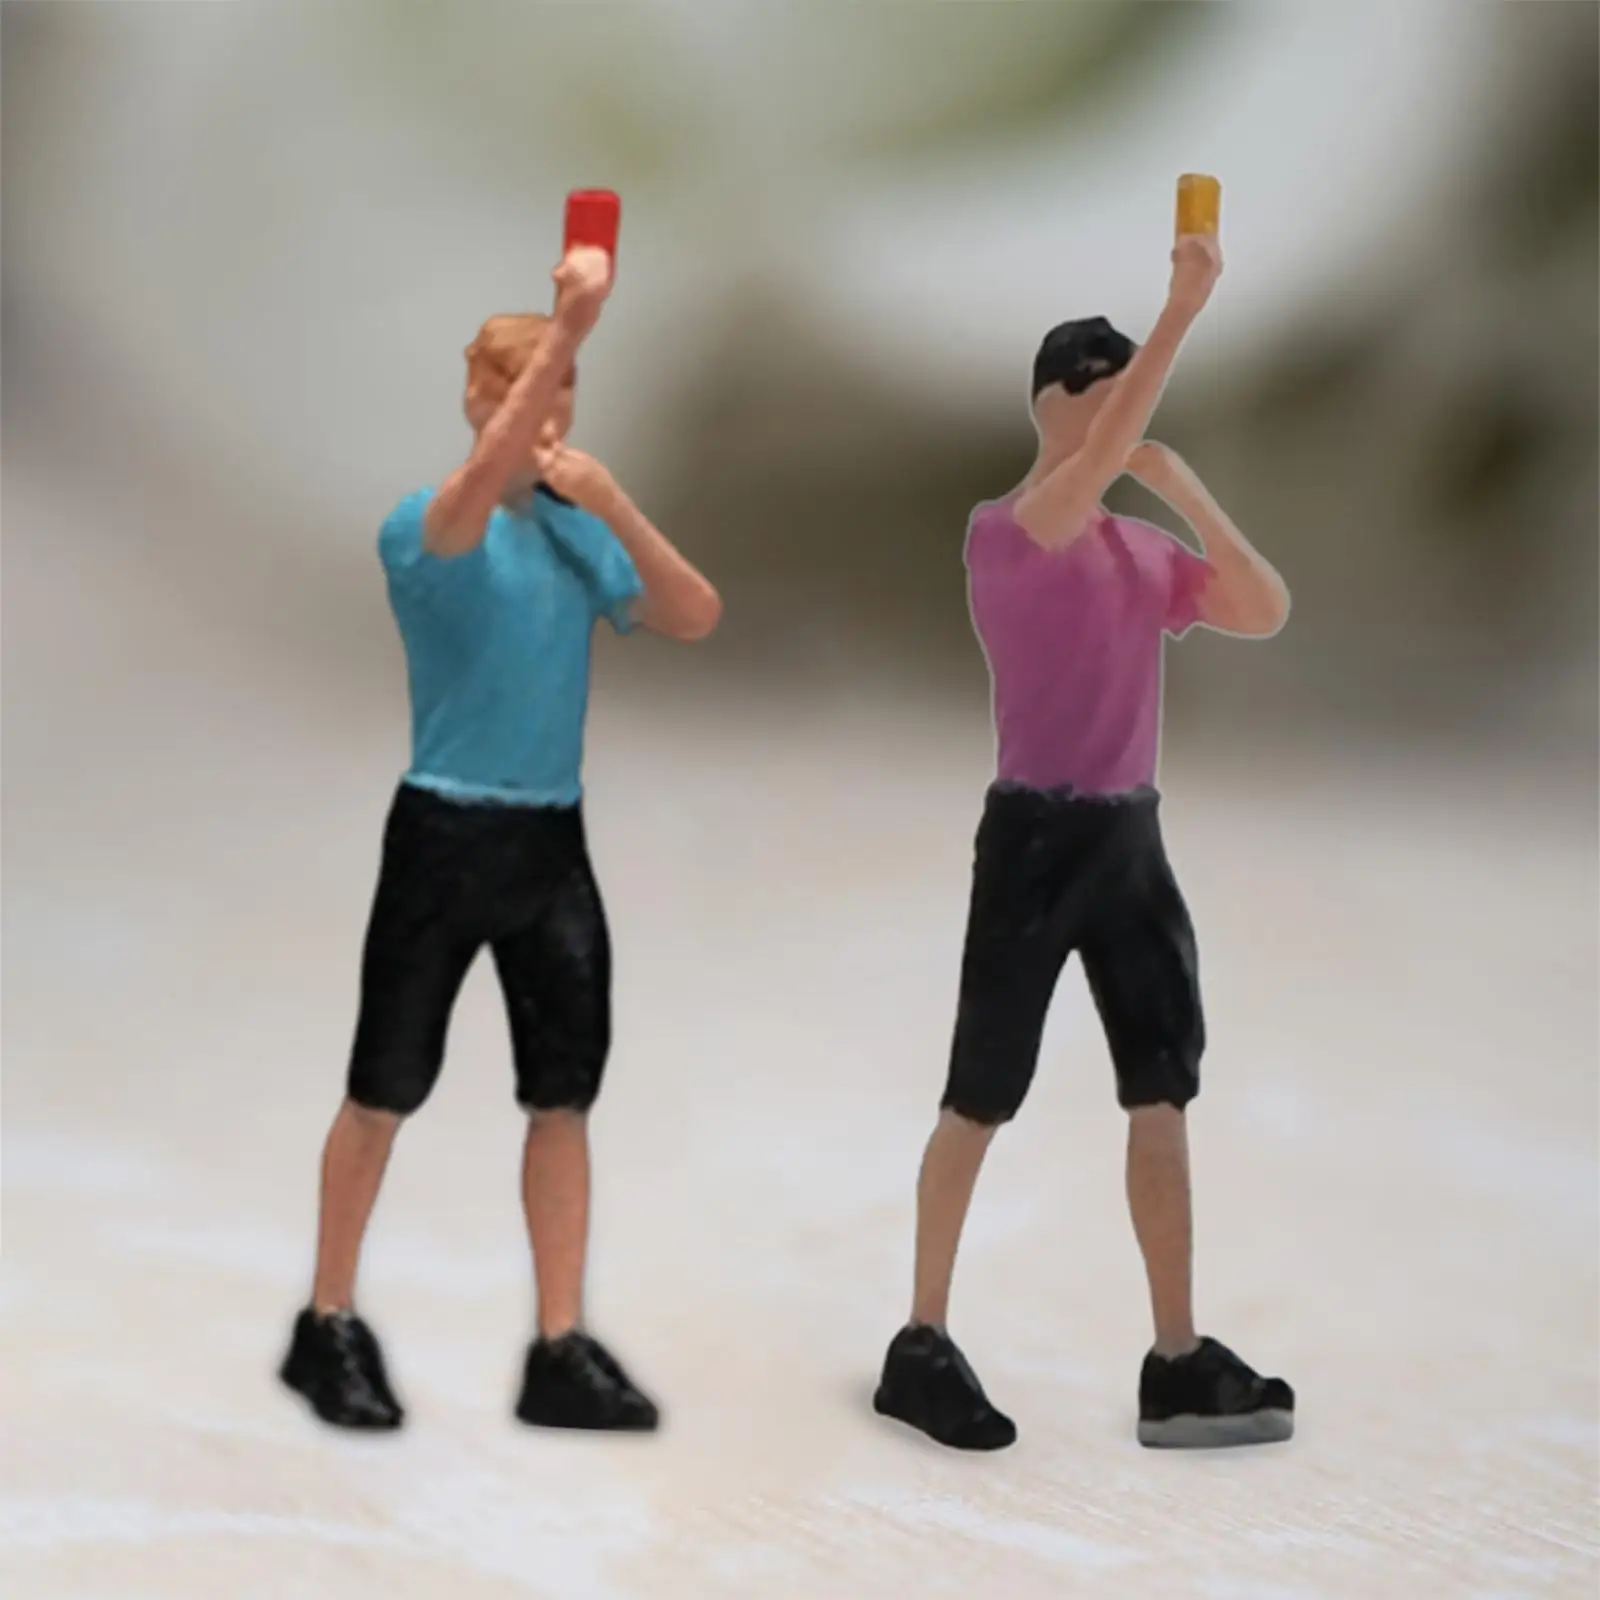 1:64 People Figures Sand Table Ornament DIY Crafts Miniature Referee Figurines for Micro Landscapes Photography Props Decoration